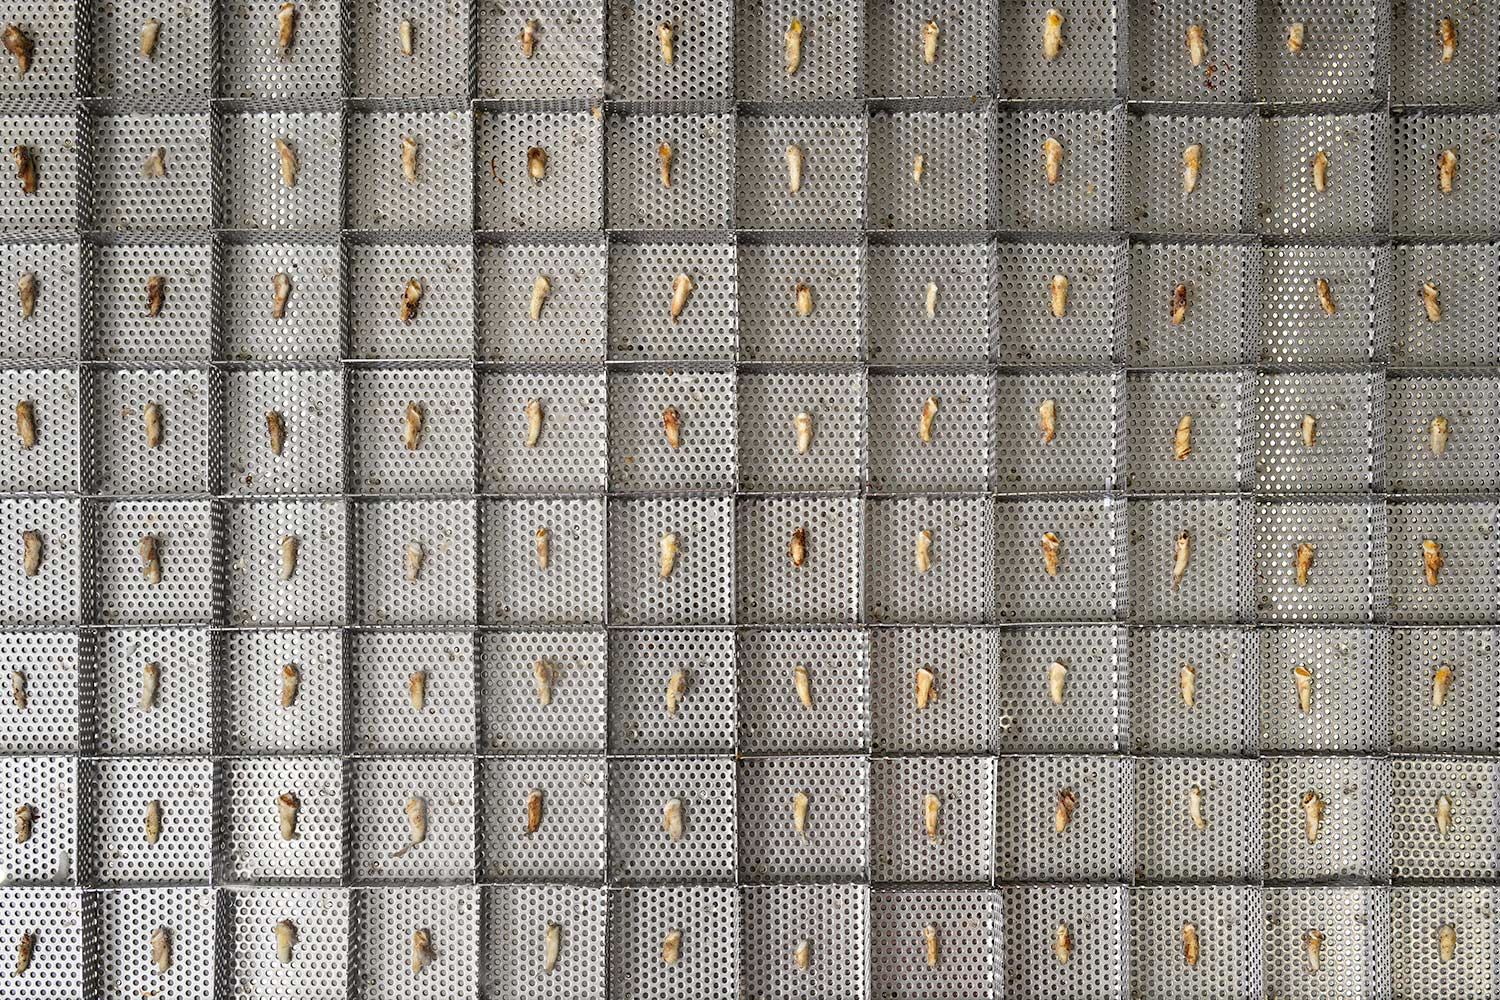 animal teeth arranged on a metal tray for cleaning